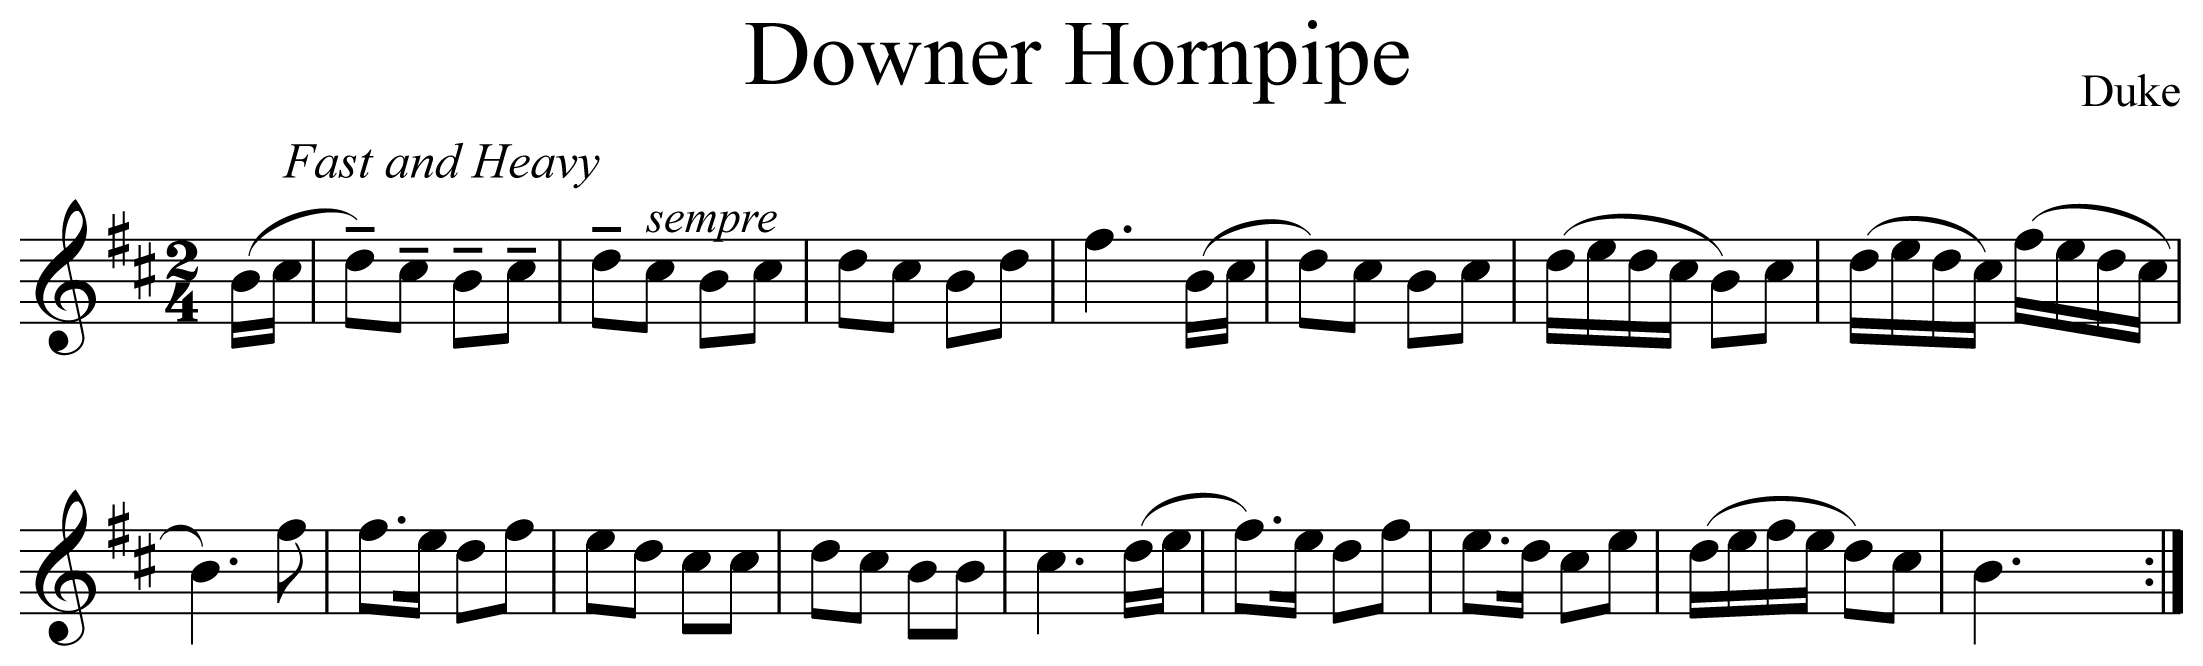 Downer Hornpipe Notation Saxophone